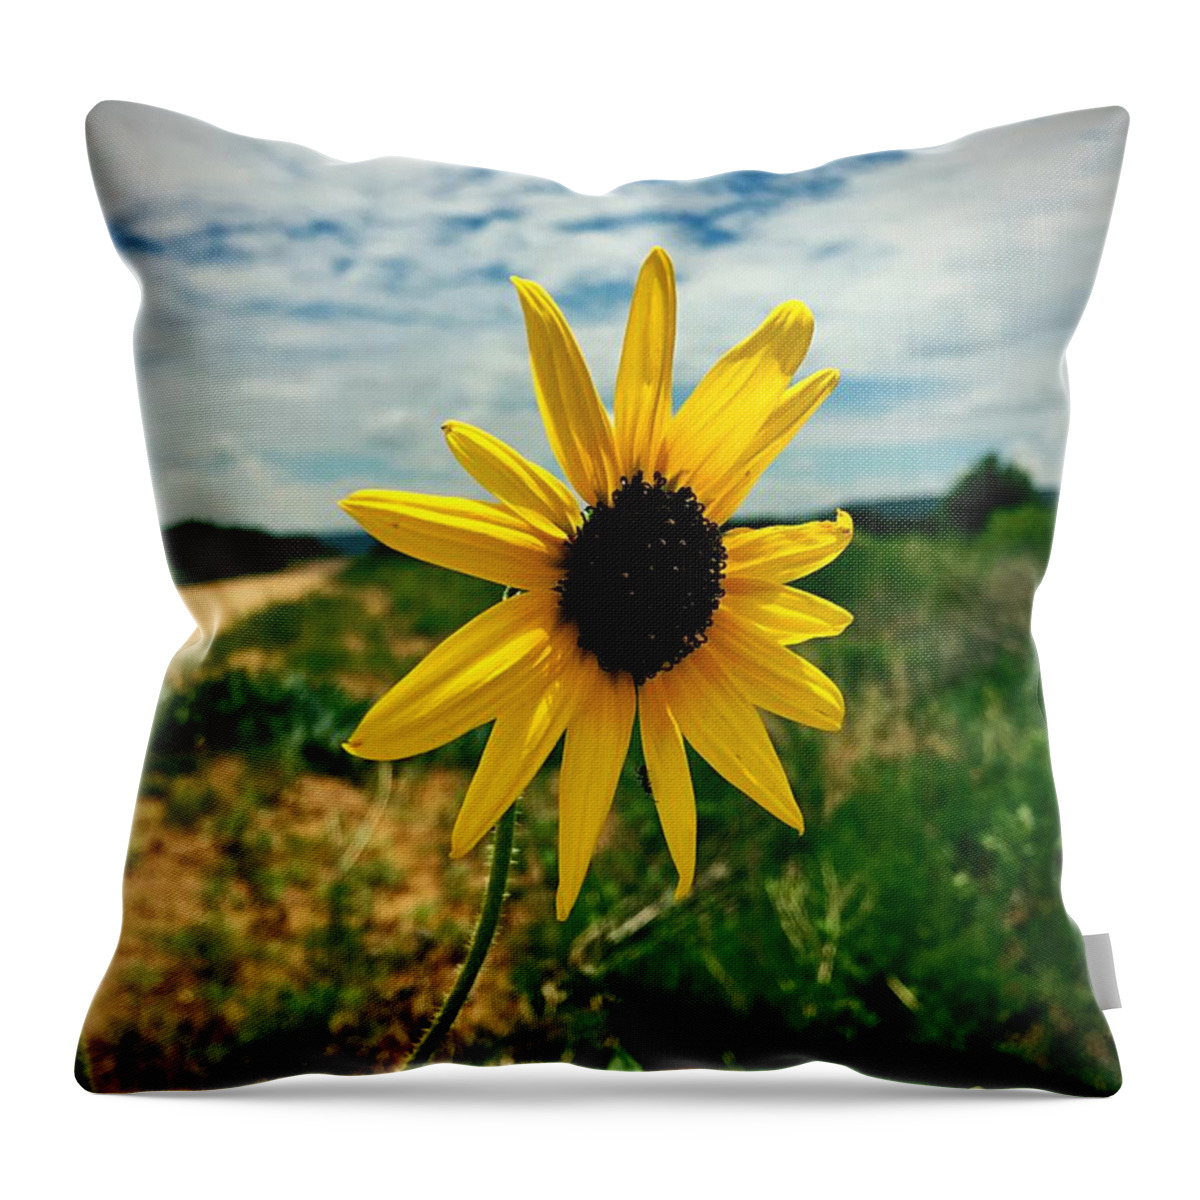 Sunflower Throw Pillow featuring the photograph Between Heaven And Earth by Brad Hodges